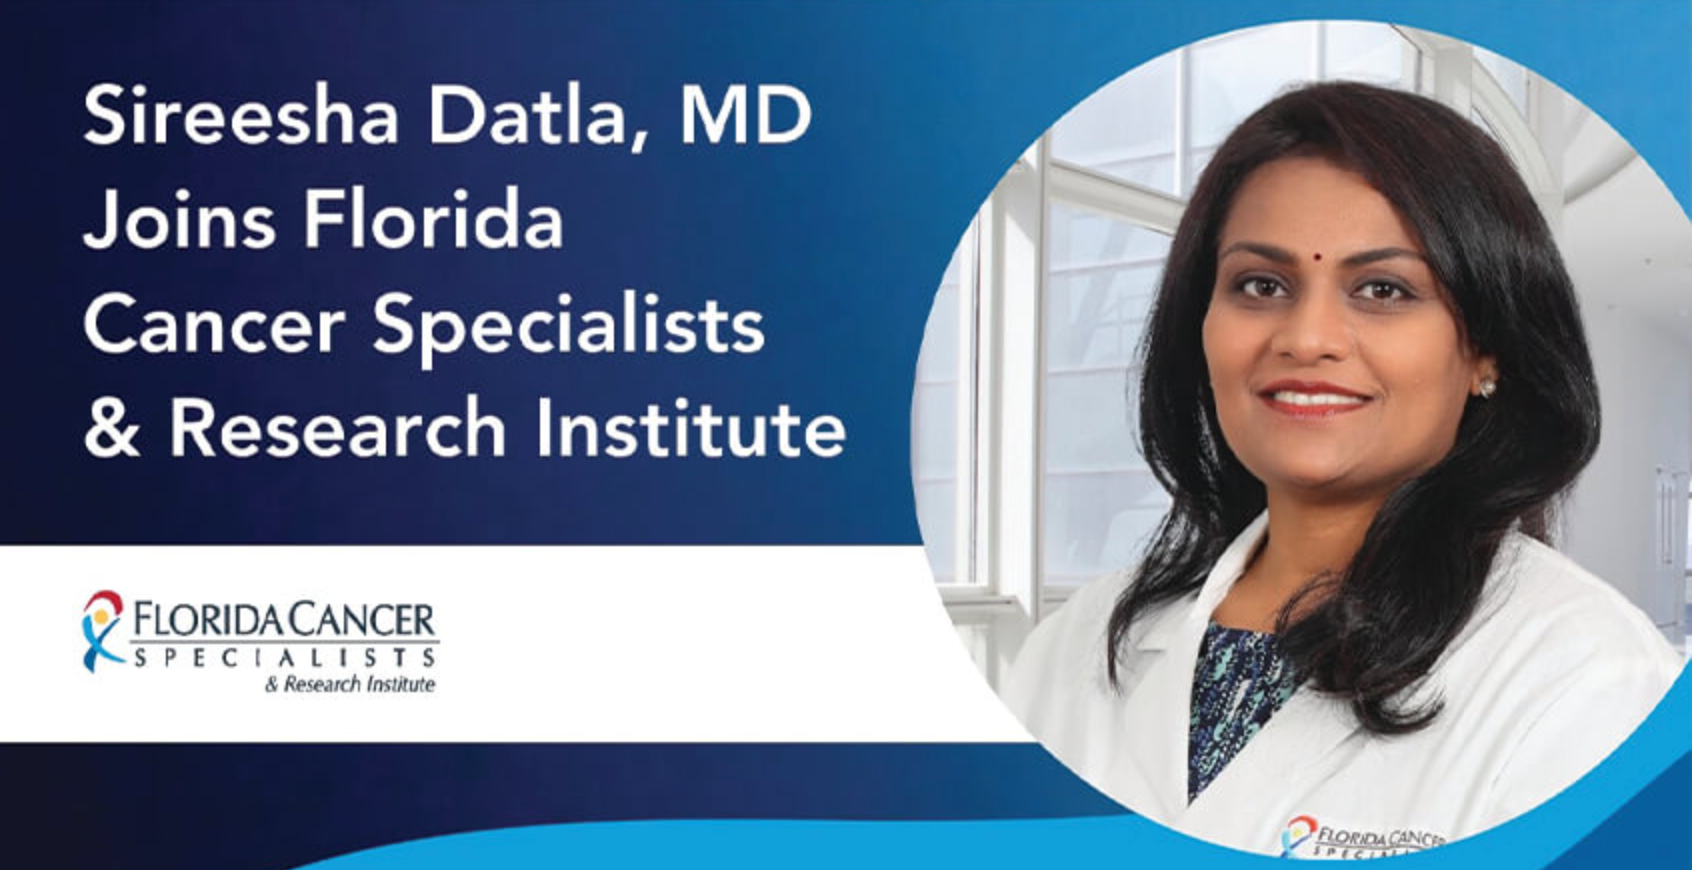 Sireesha Datla, MD Joins Florida Cancer Specialists & Research Institute